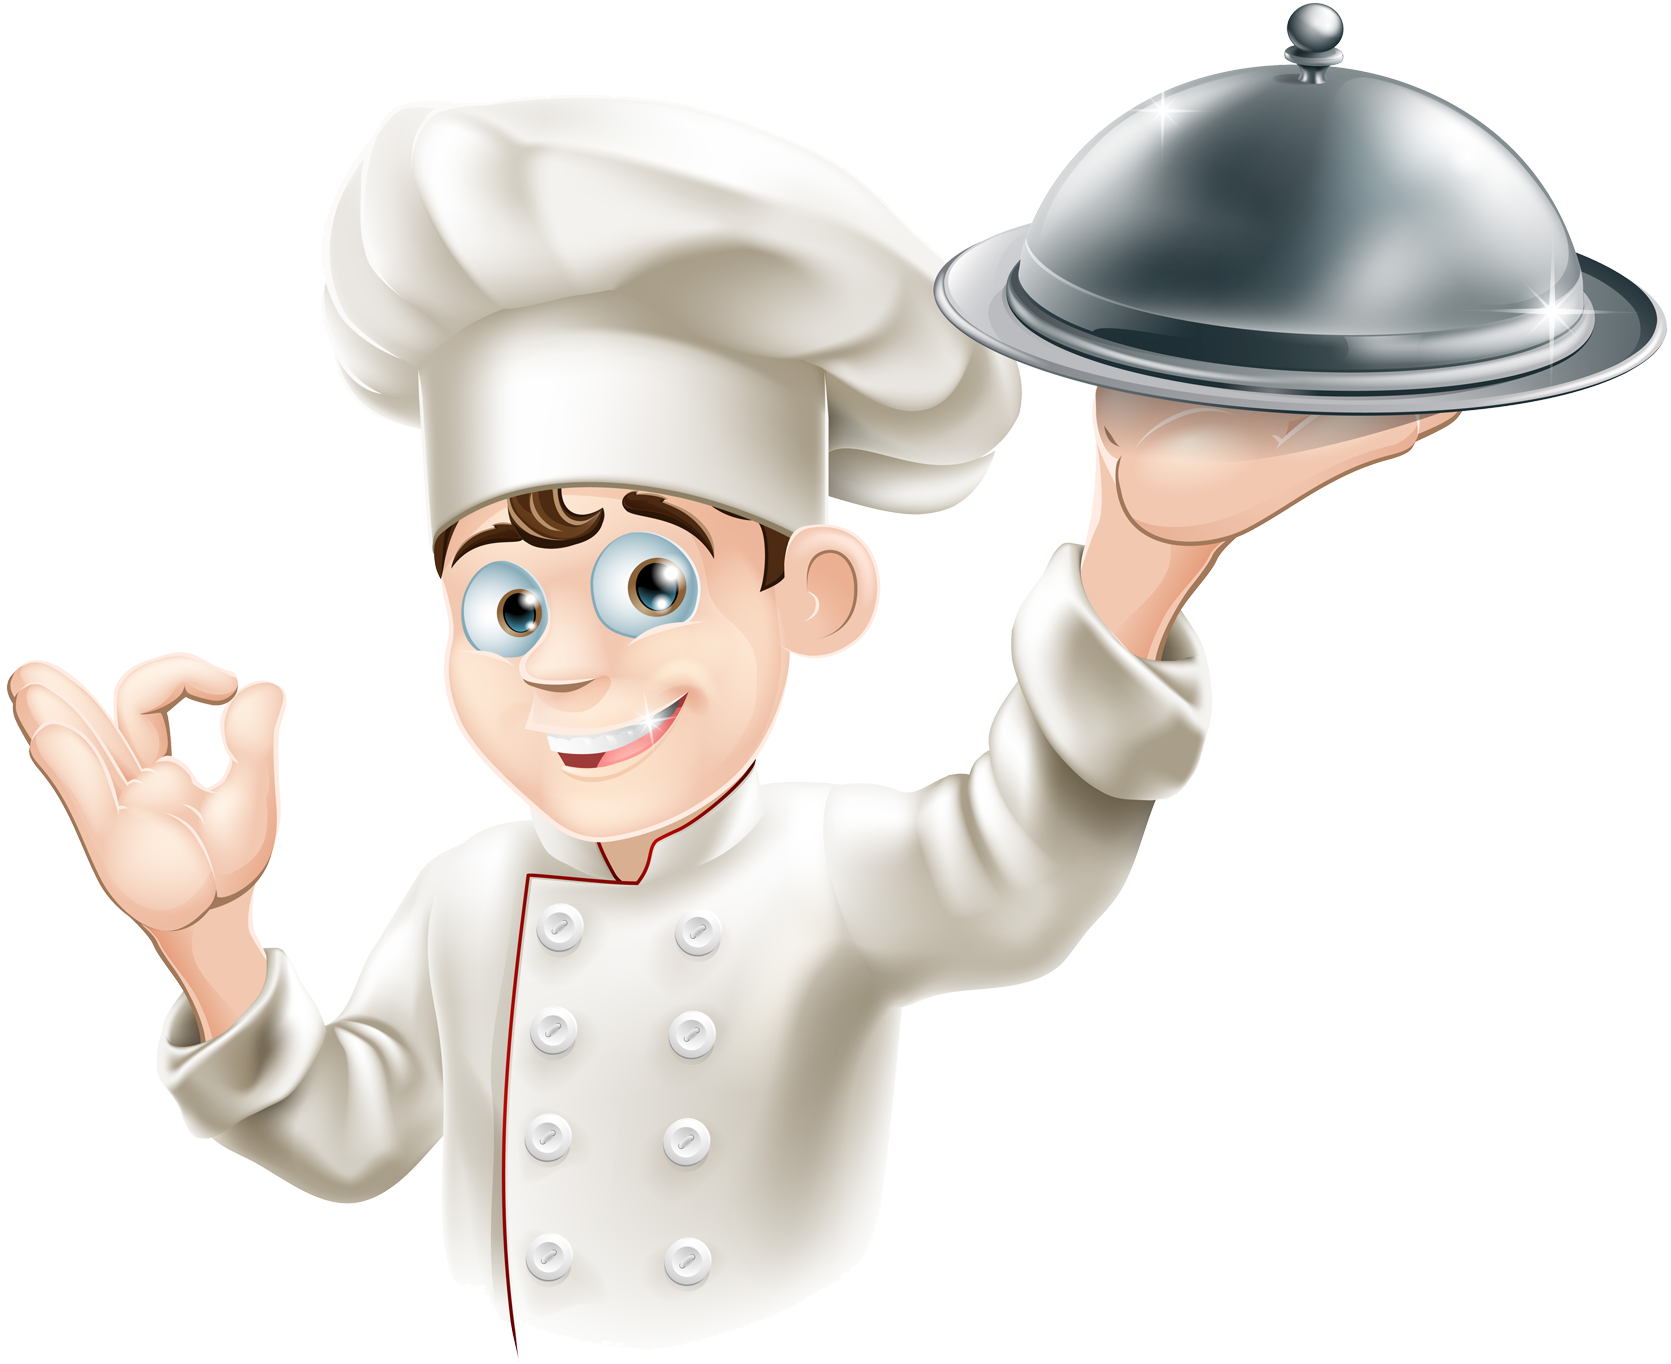 Male Chef PNG Image